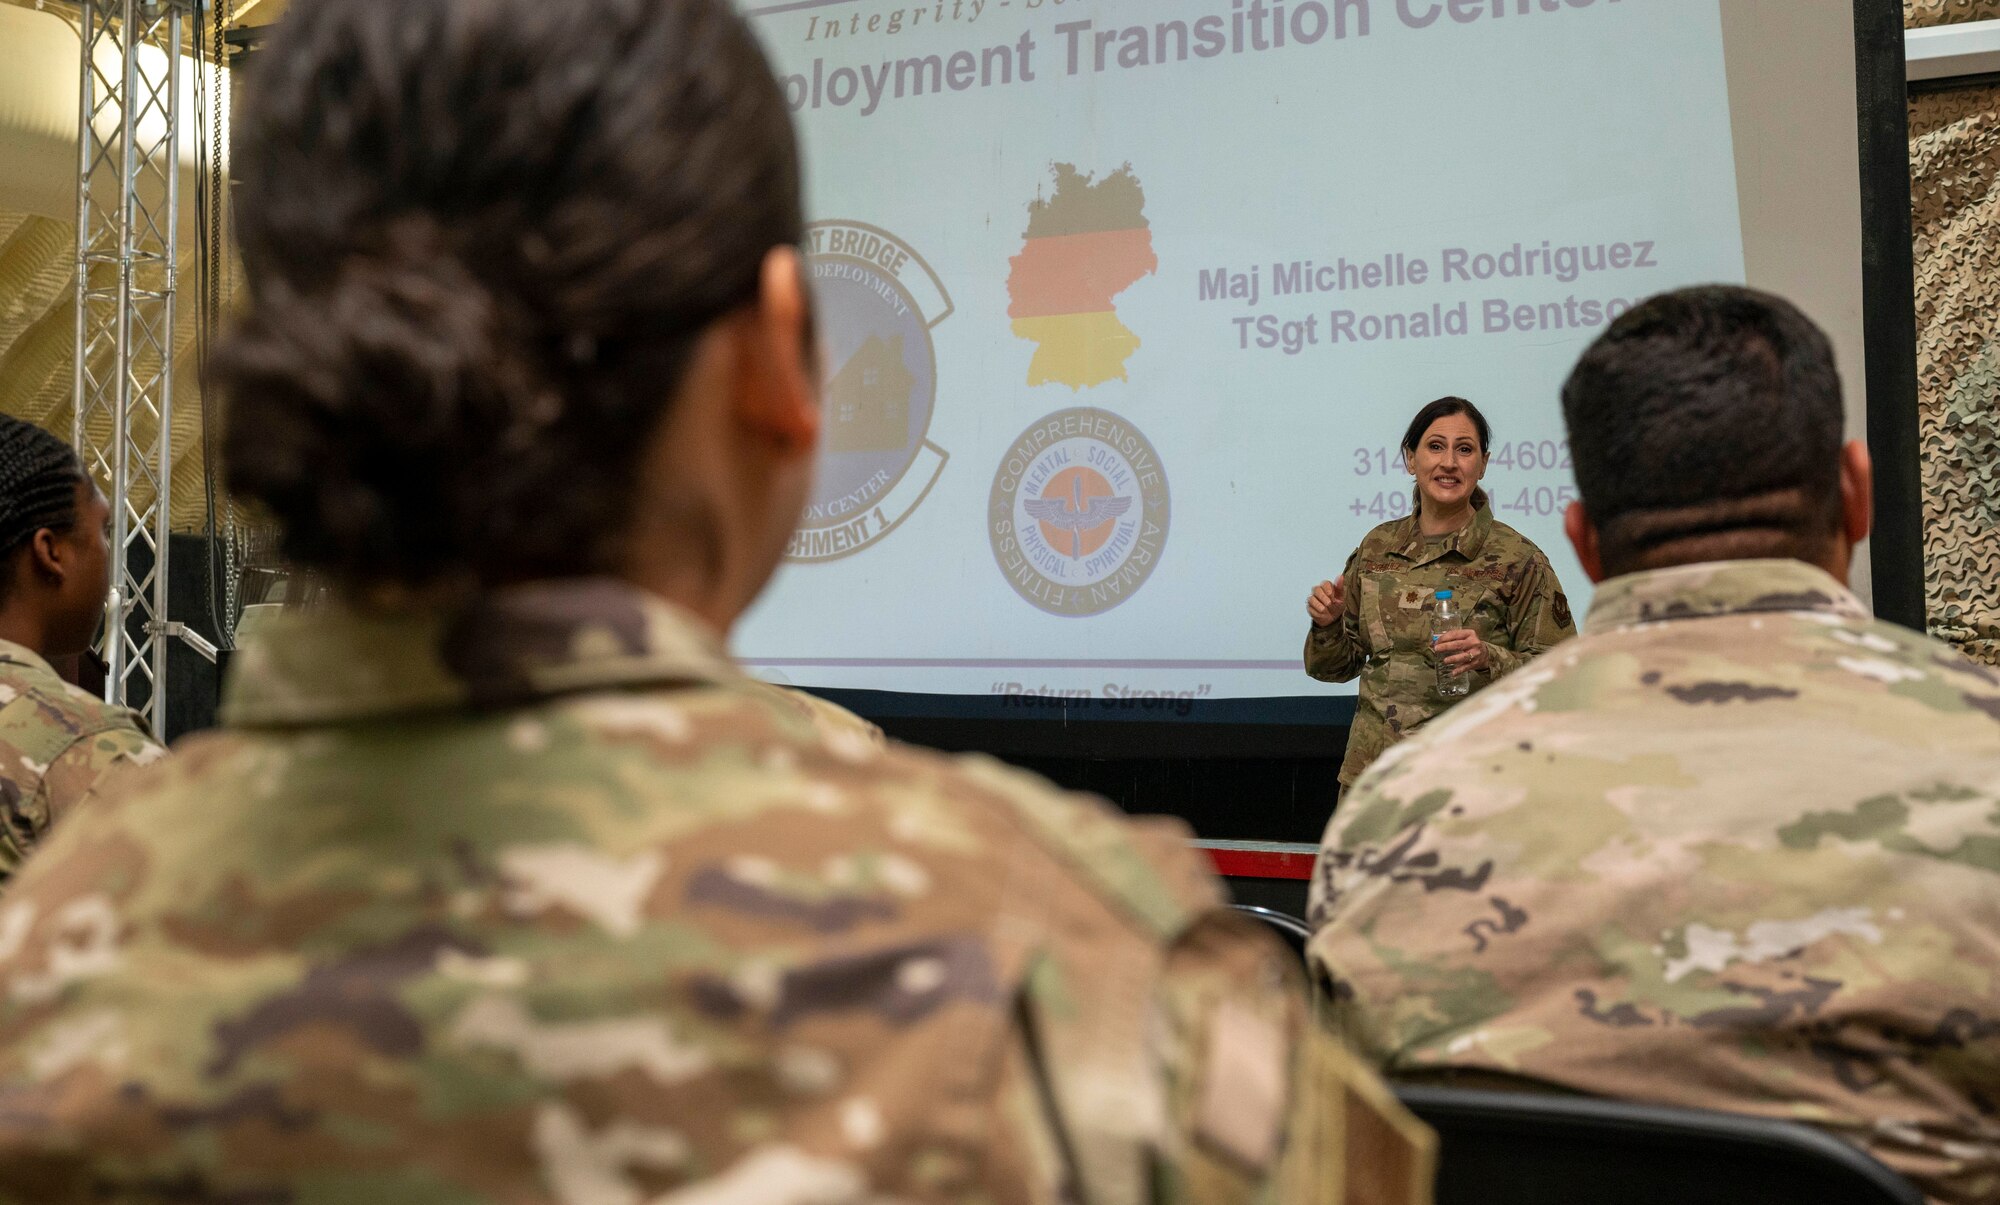 Deployment Transition Center experts host Town Hall for Red Tails